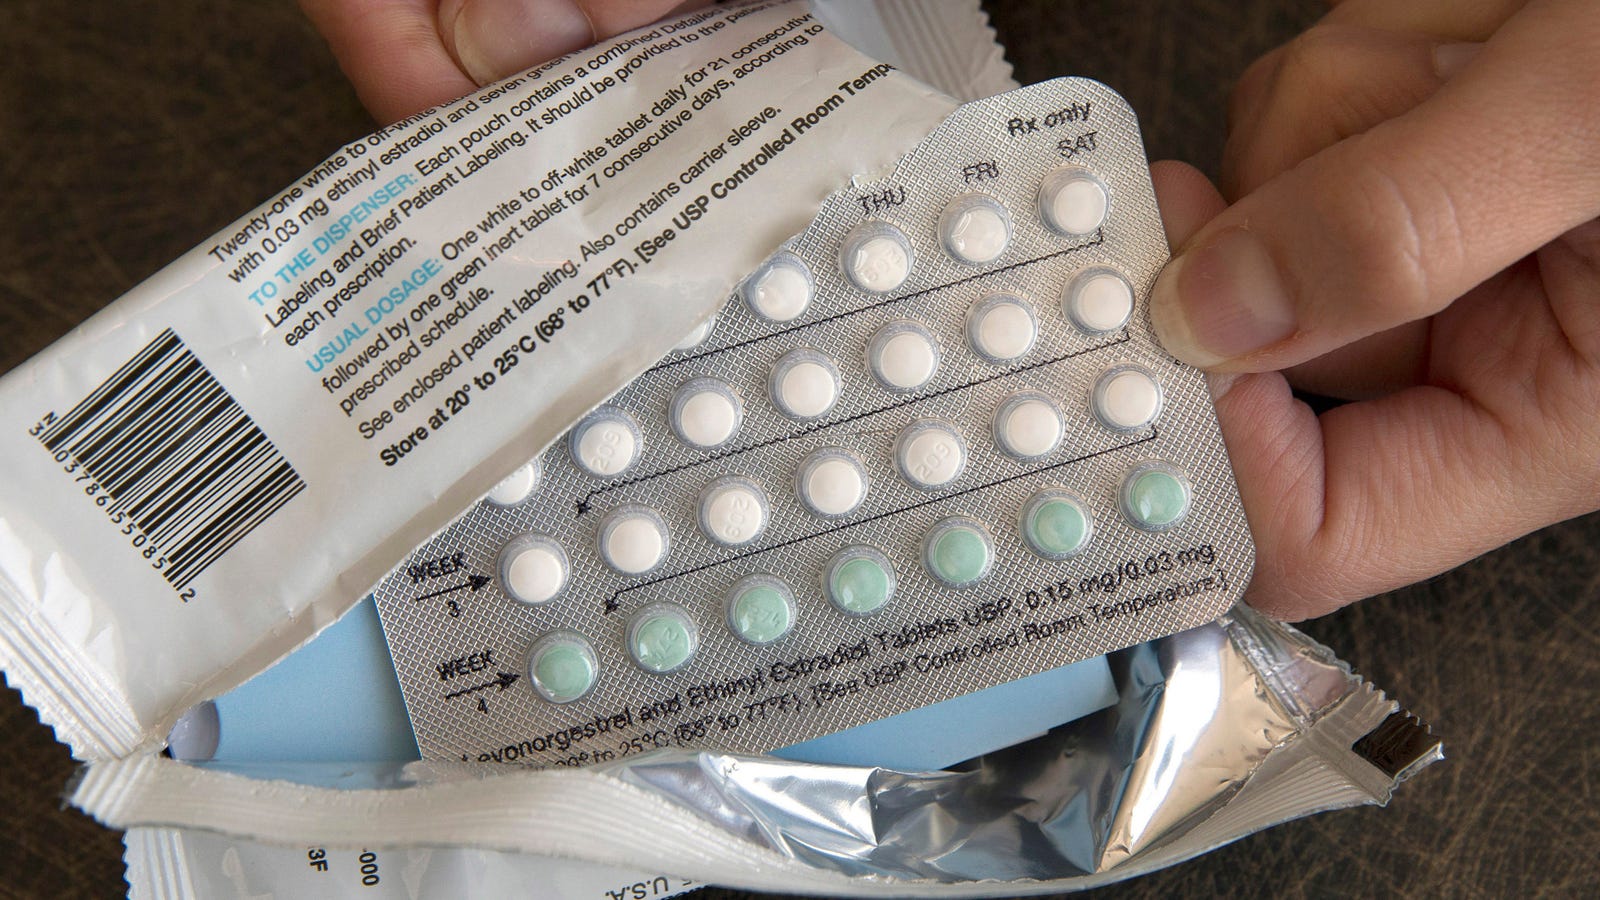 Buying Birth Control Online Can Be Quick, Affordable, and Safe, Study Finds - Gizmodo thumbnail